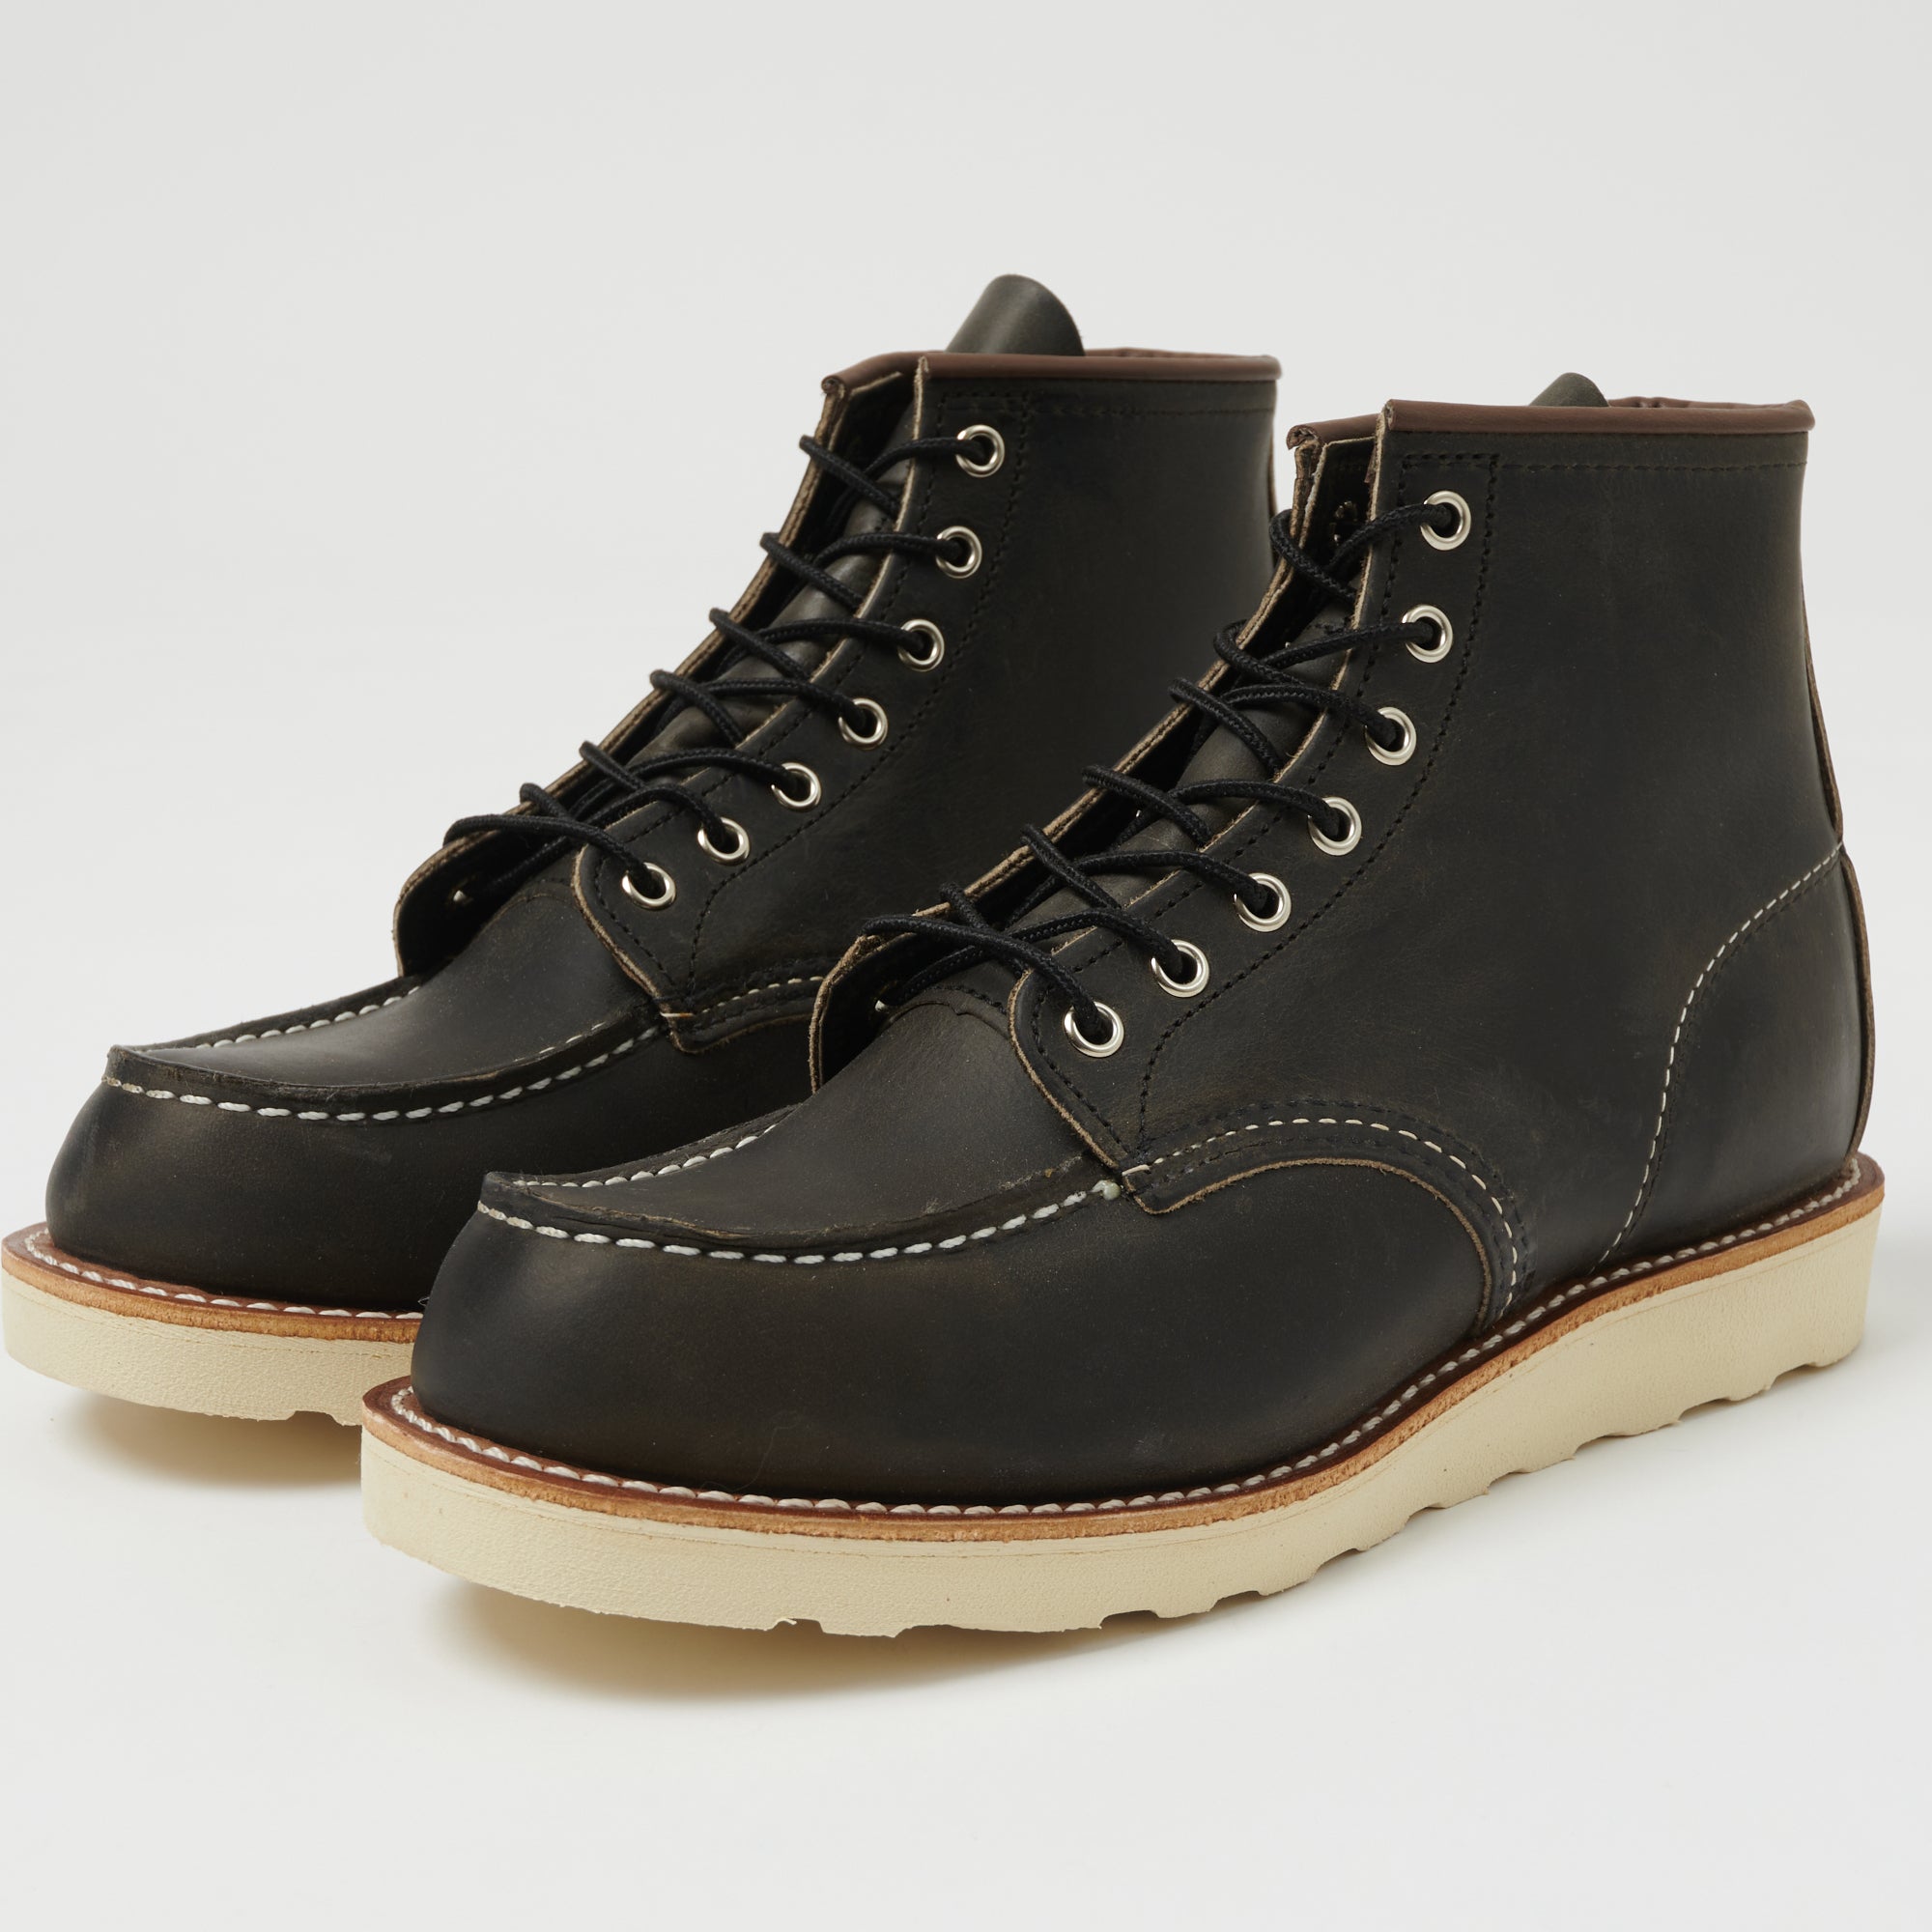 Red Wing 8890 6